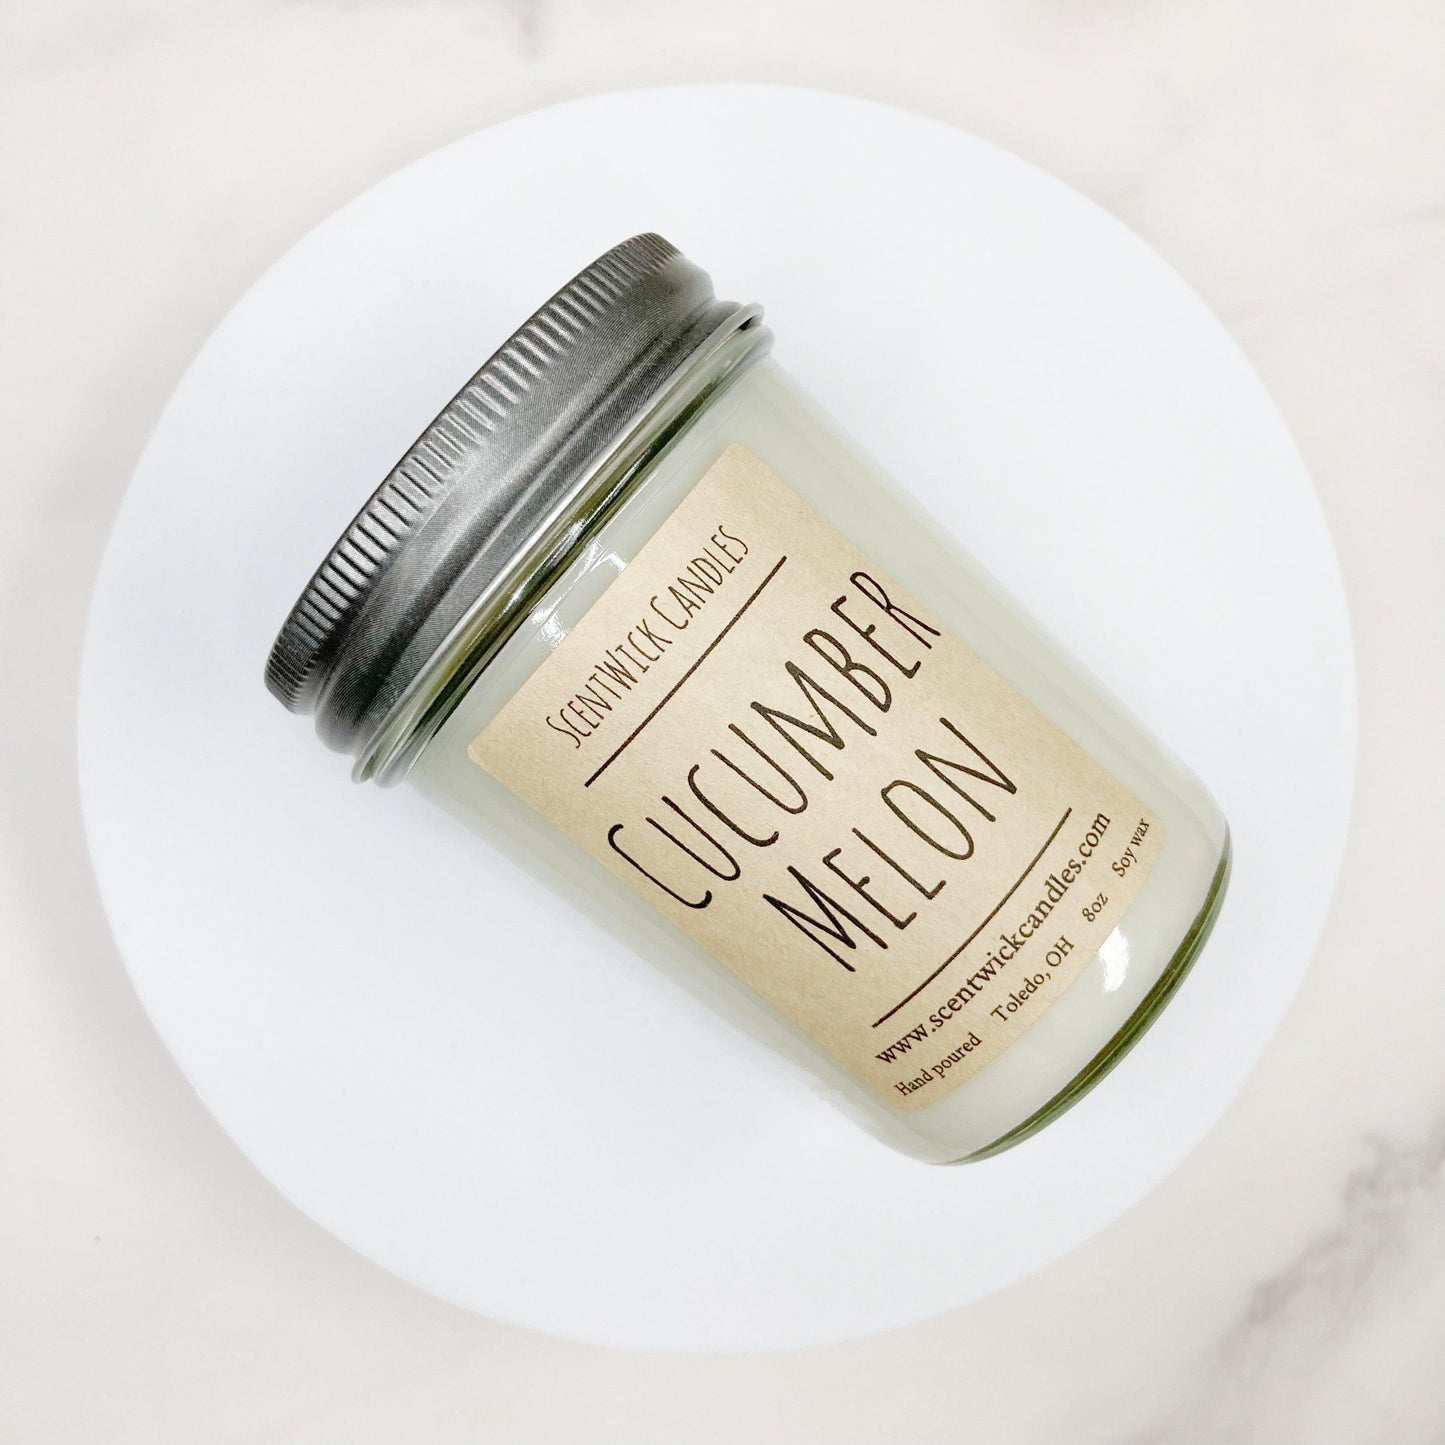 Cucumber Melon Candle - ScentWick Candles